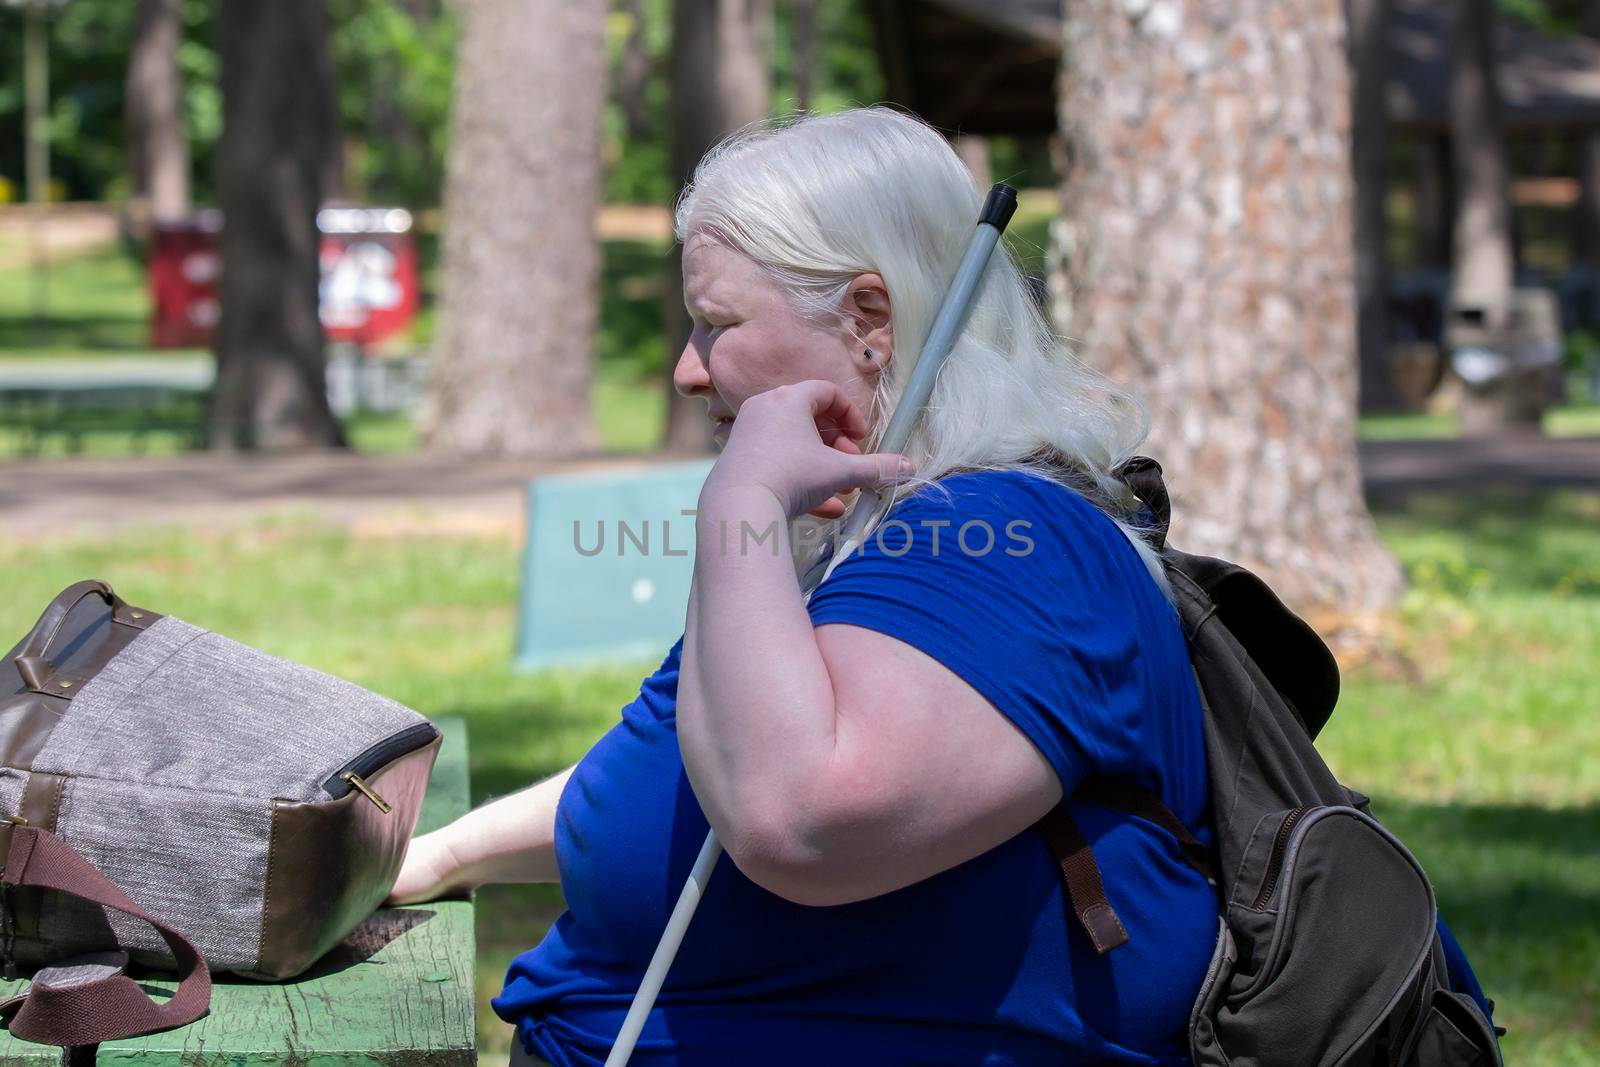 Albino woman relaxing on a park bench, with a backpack on her shoulders and an open carrying case on the table